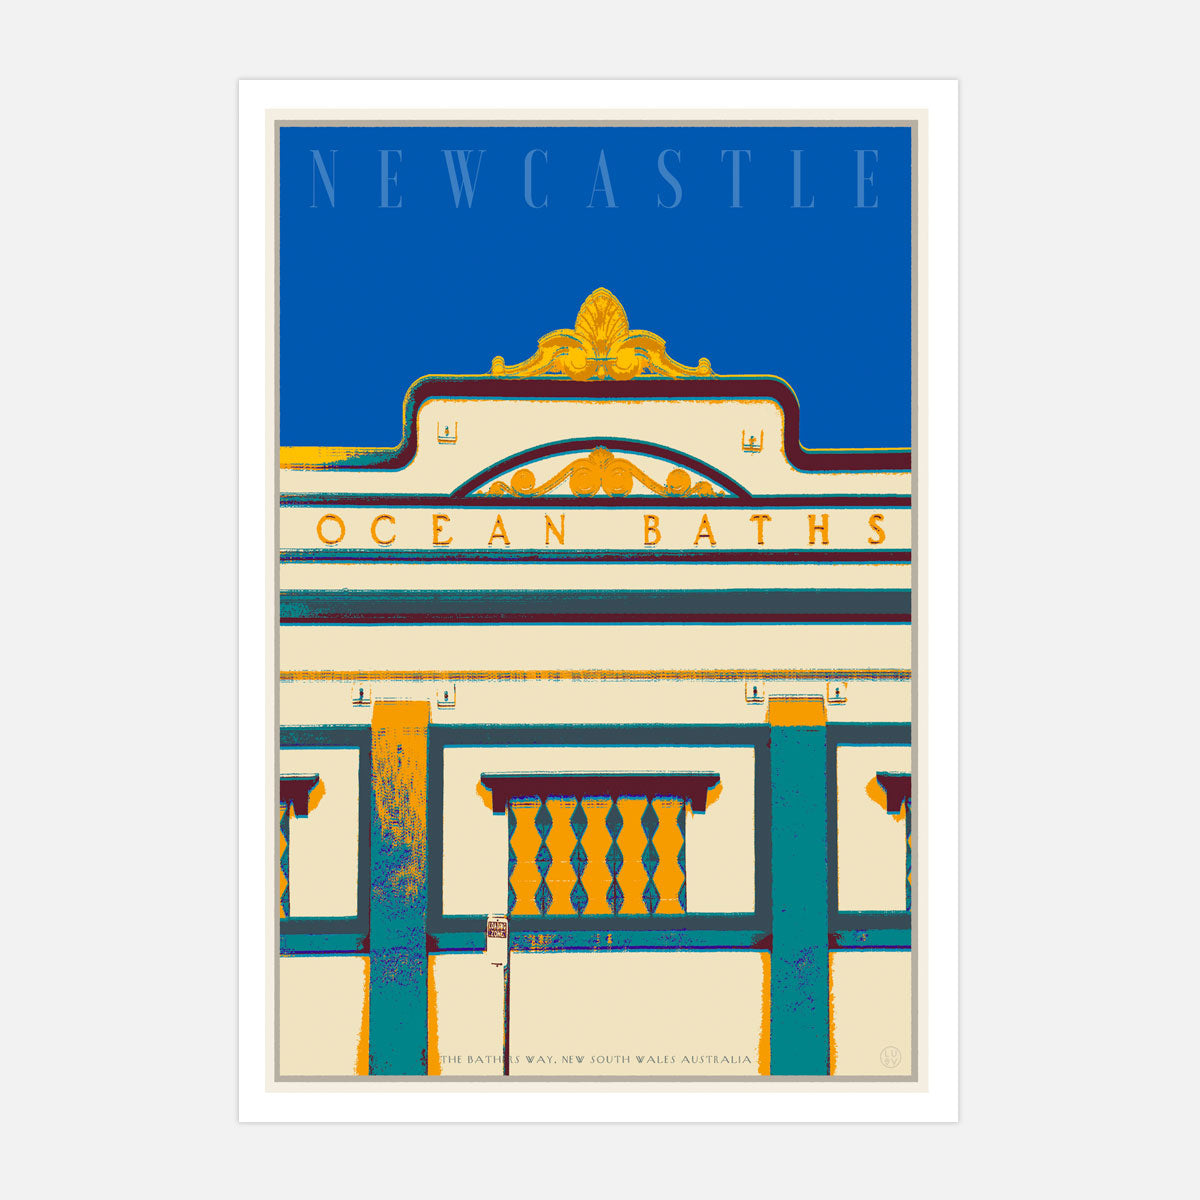 Newcastle baths deco pop travel poster by Places We Luv